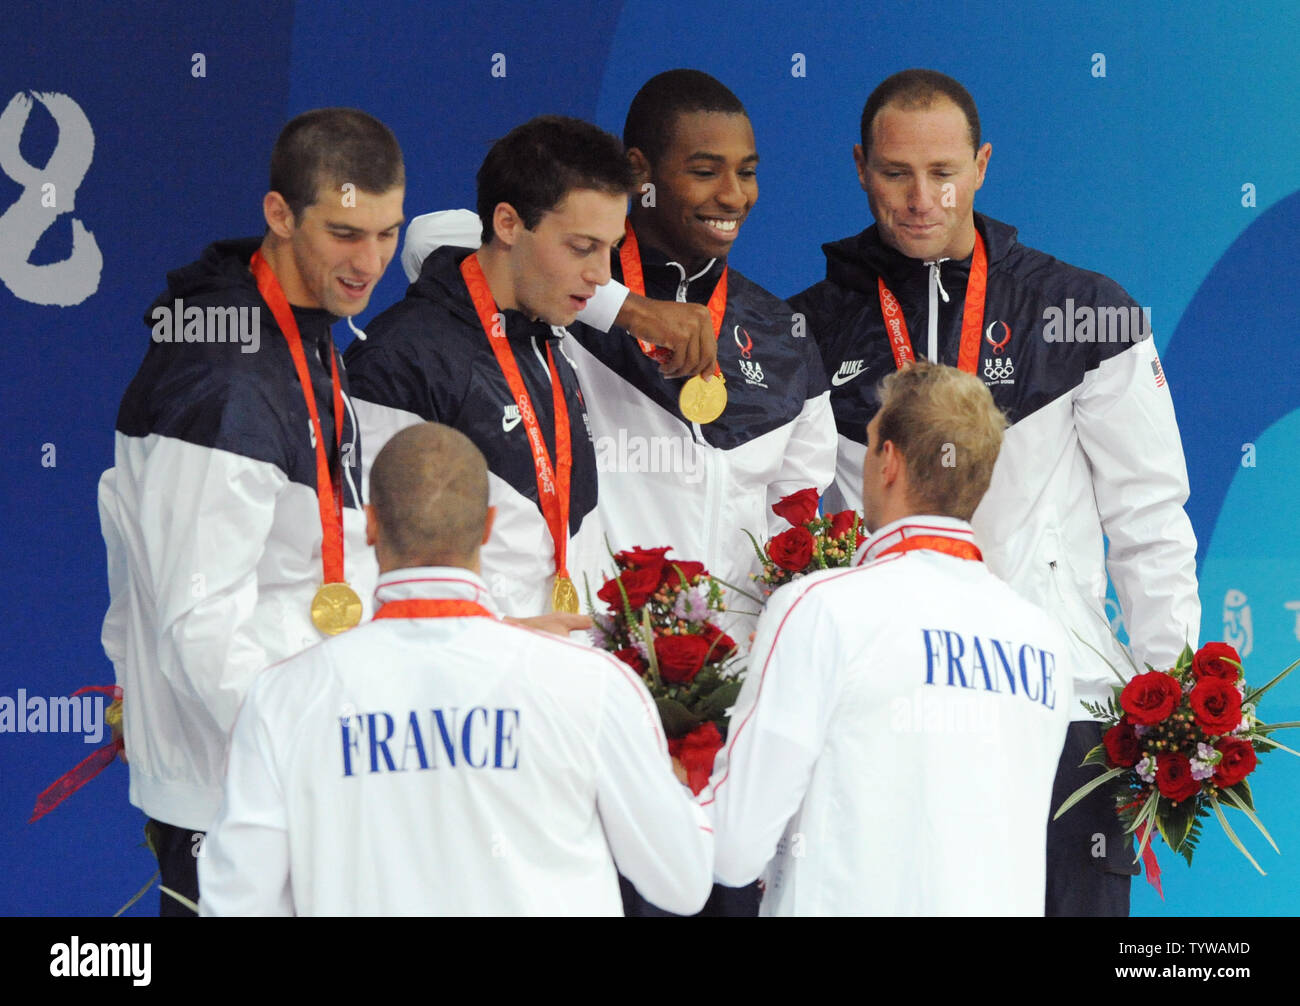 The French 4x100M Relay team congratulates the USA's gold medal team of (L-R) Michael Phelps, Garrett Weber-Gale, Cullen Jones and Jason Lezak during the awards ceremony at the National Aquatics Center at the Summer Olympics in Beijing on August 11, 2008.  The United States team won the gold in a World Record time of 3:08.24, nipping the French team by 0.07 second.    (UPI Photo/Pat Benic) Stock Photo